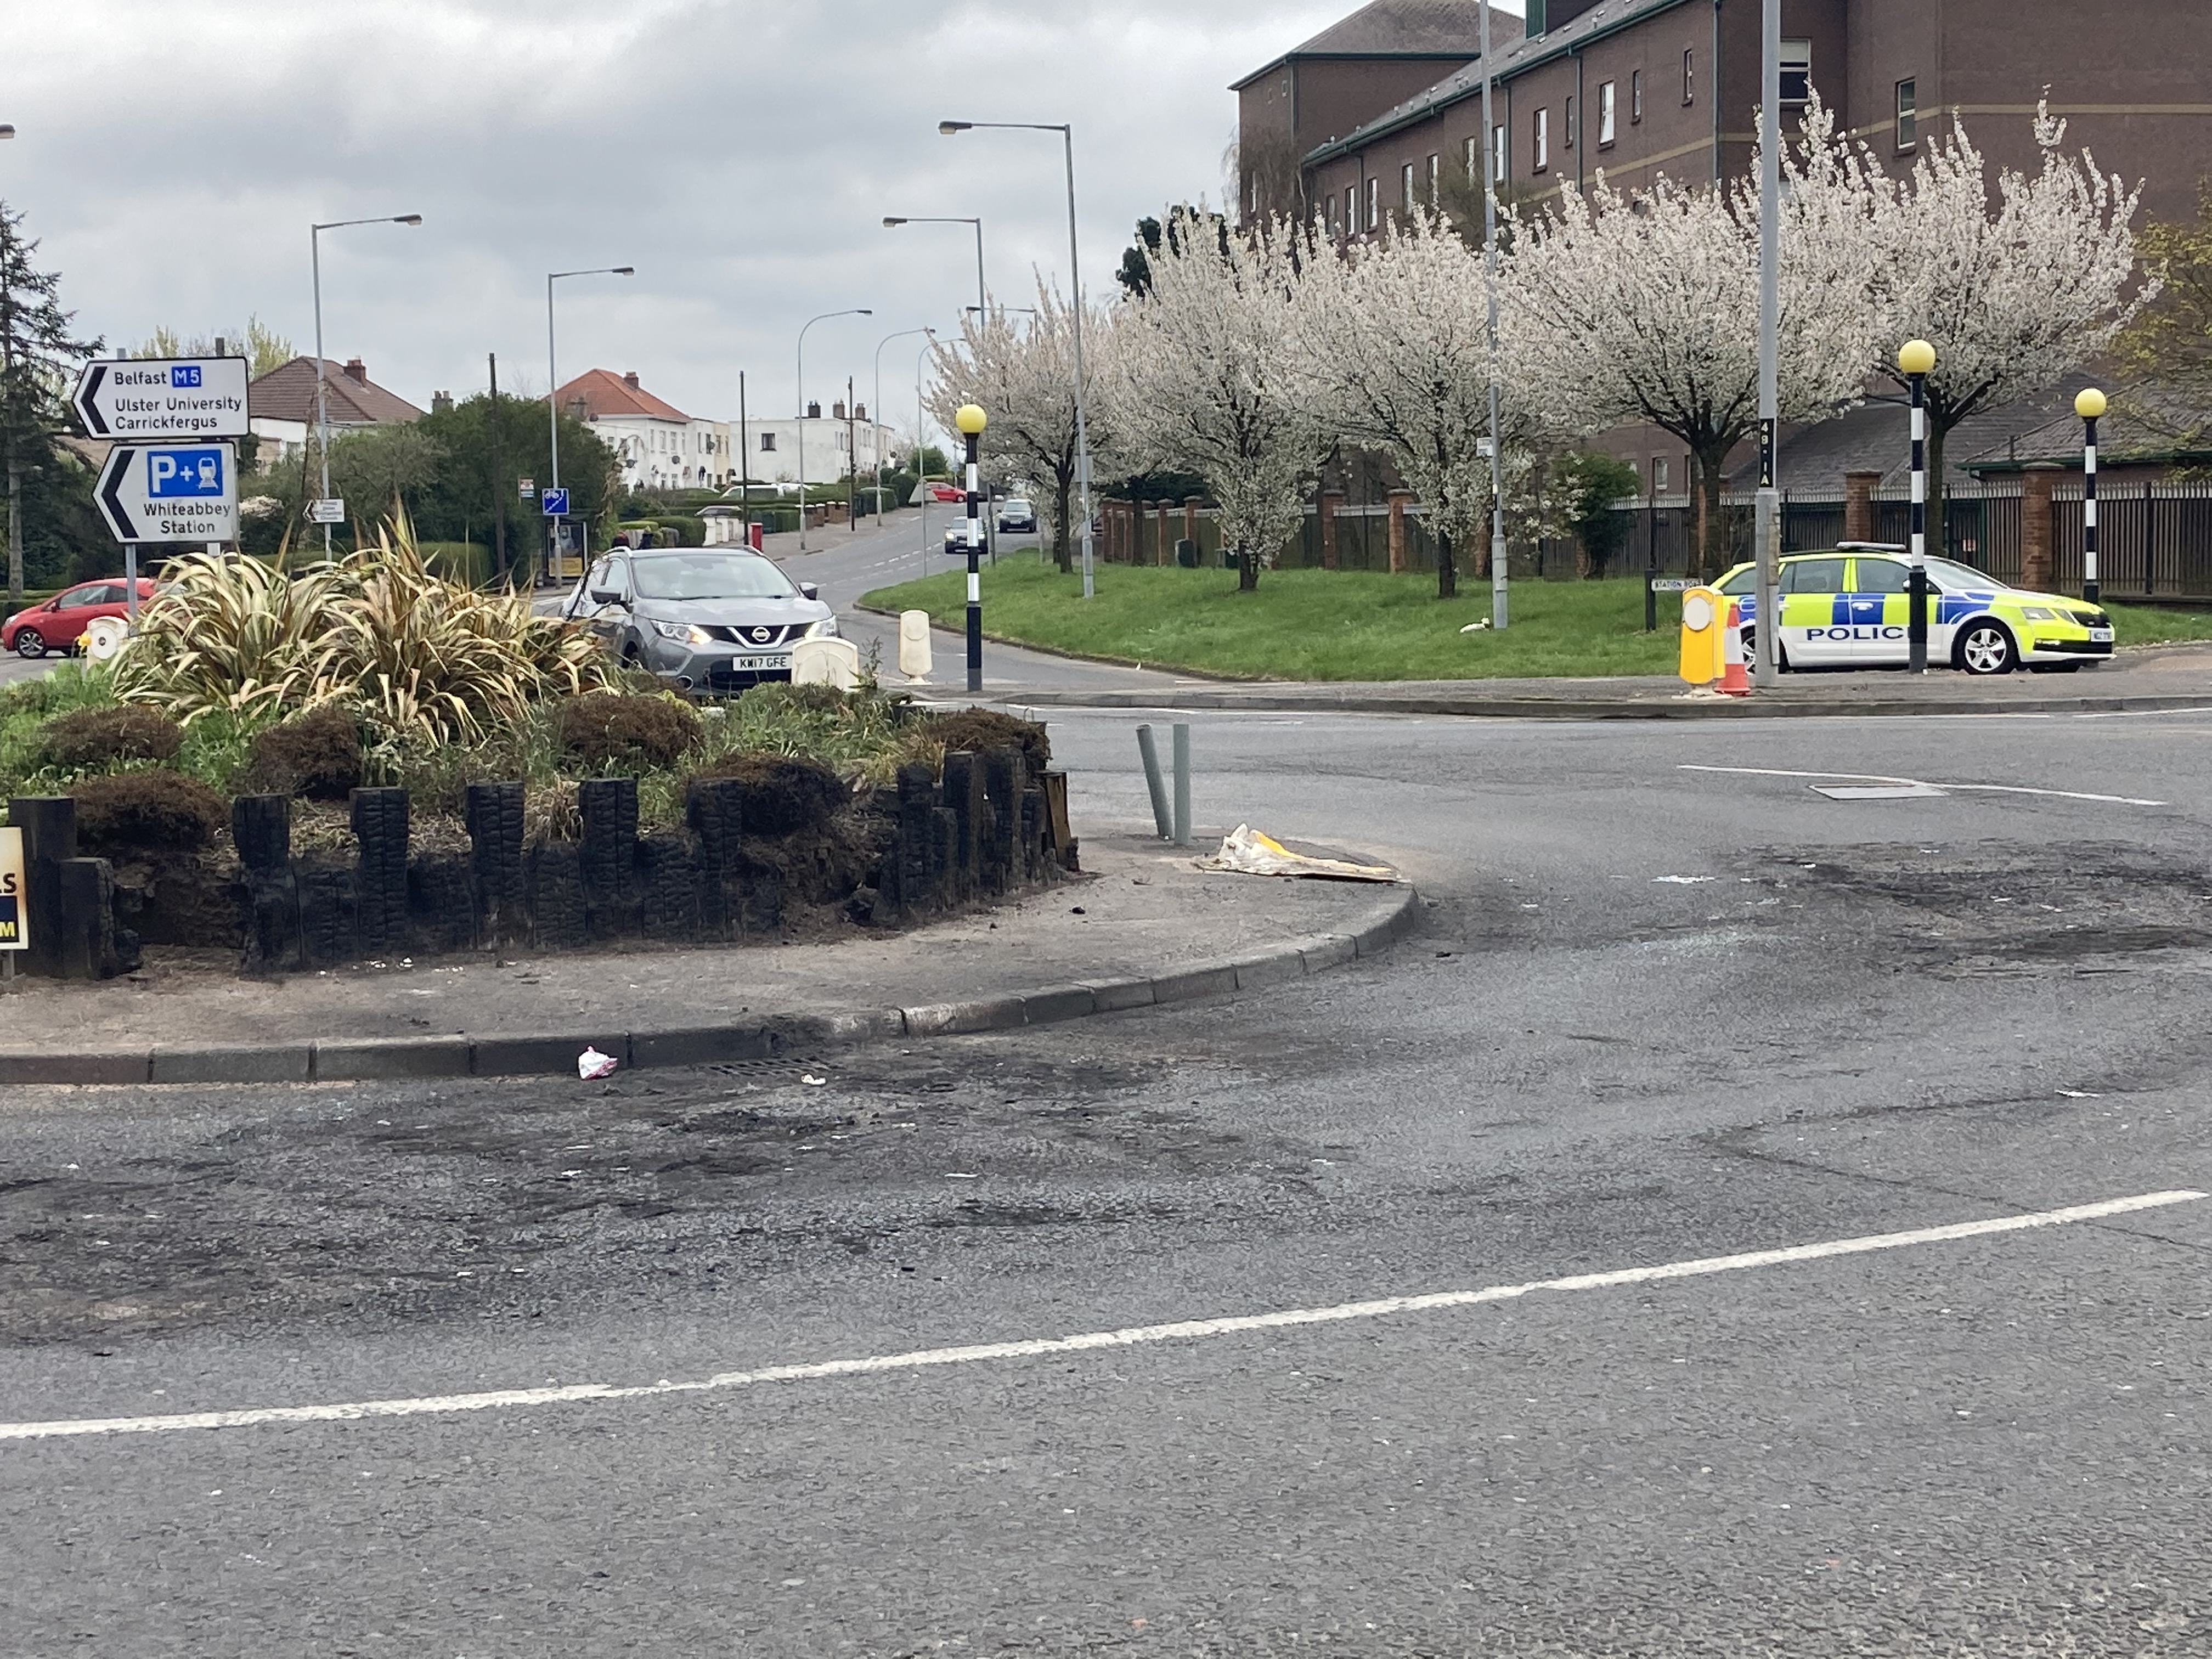 The scene in Newtownabbey, Co Antrim where police came under attack with 30 petrol bombs on Saturday